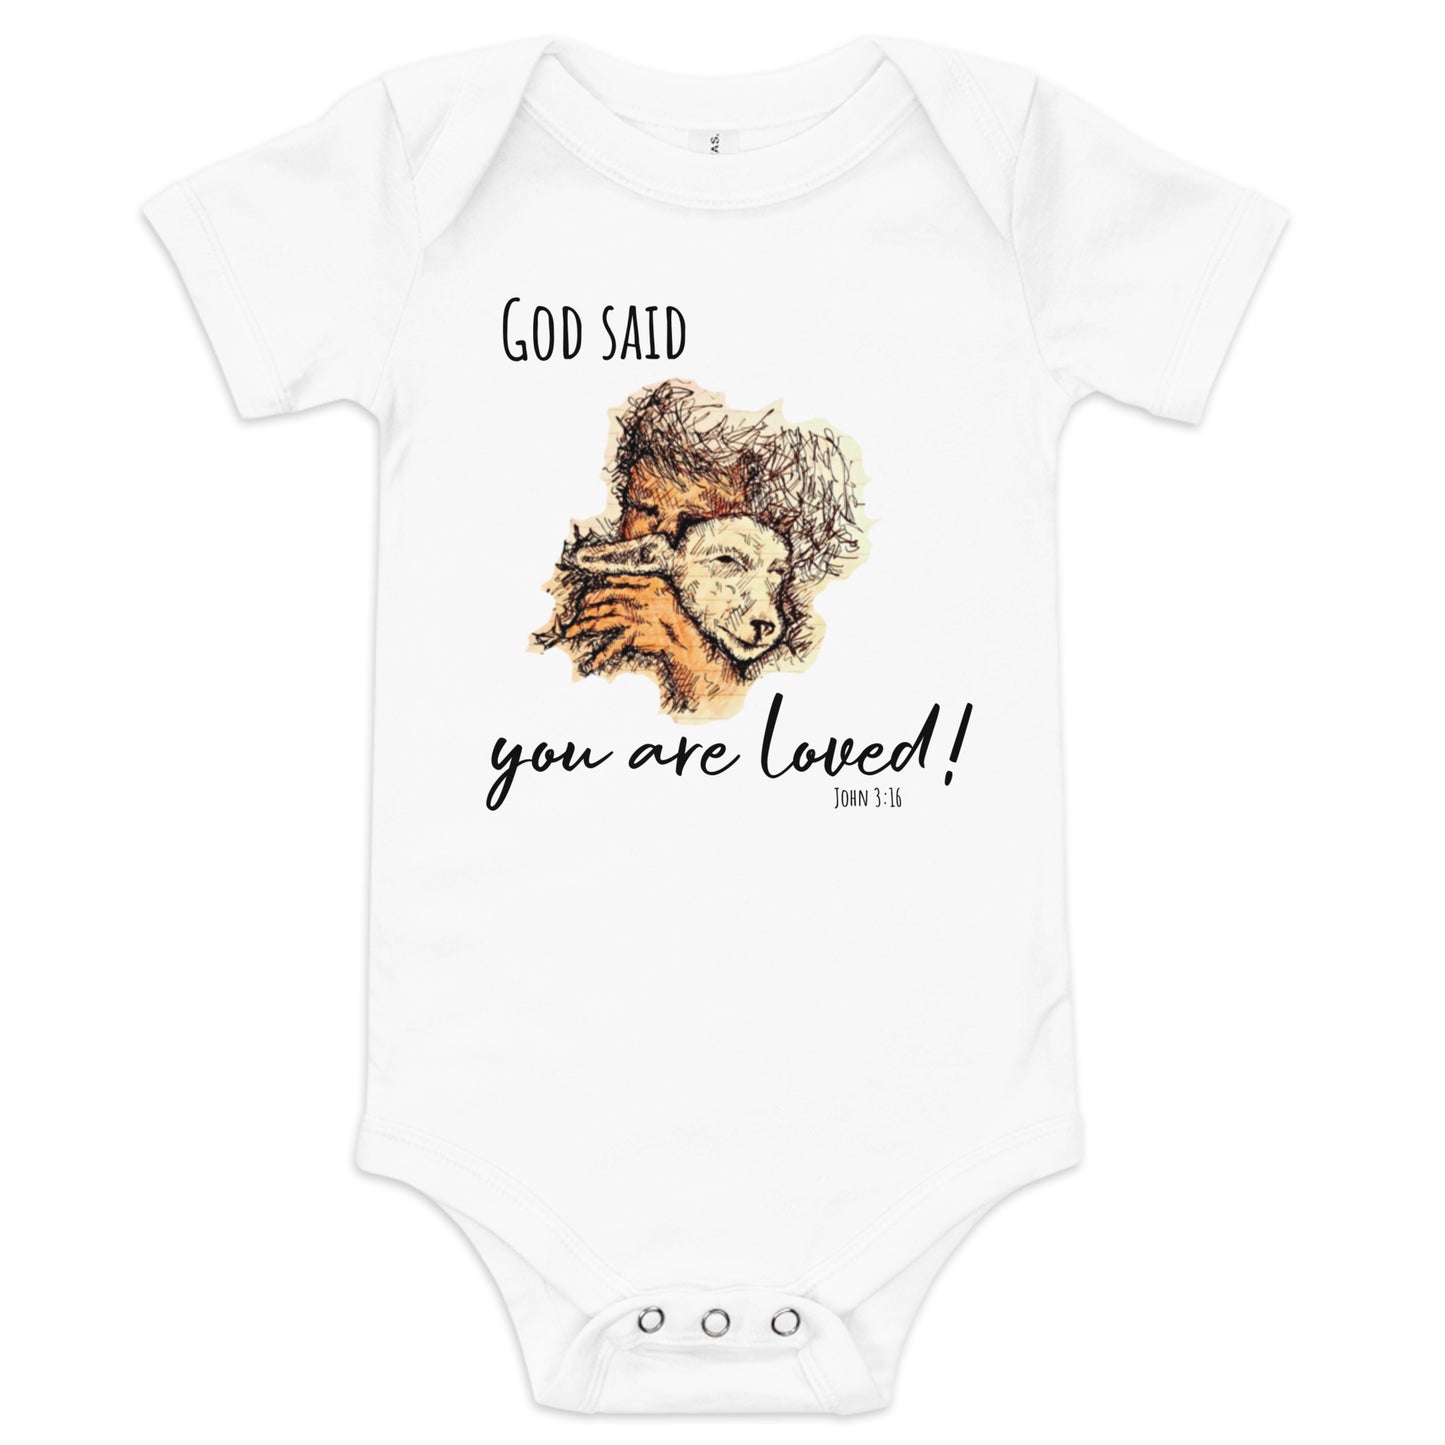 God Said "You are Loved" Baby short sleeve one piece